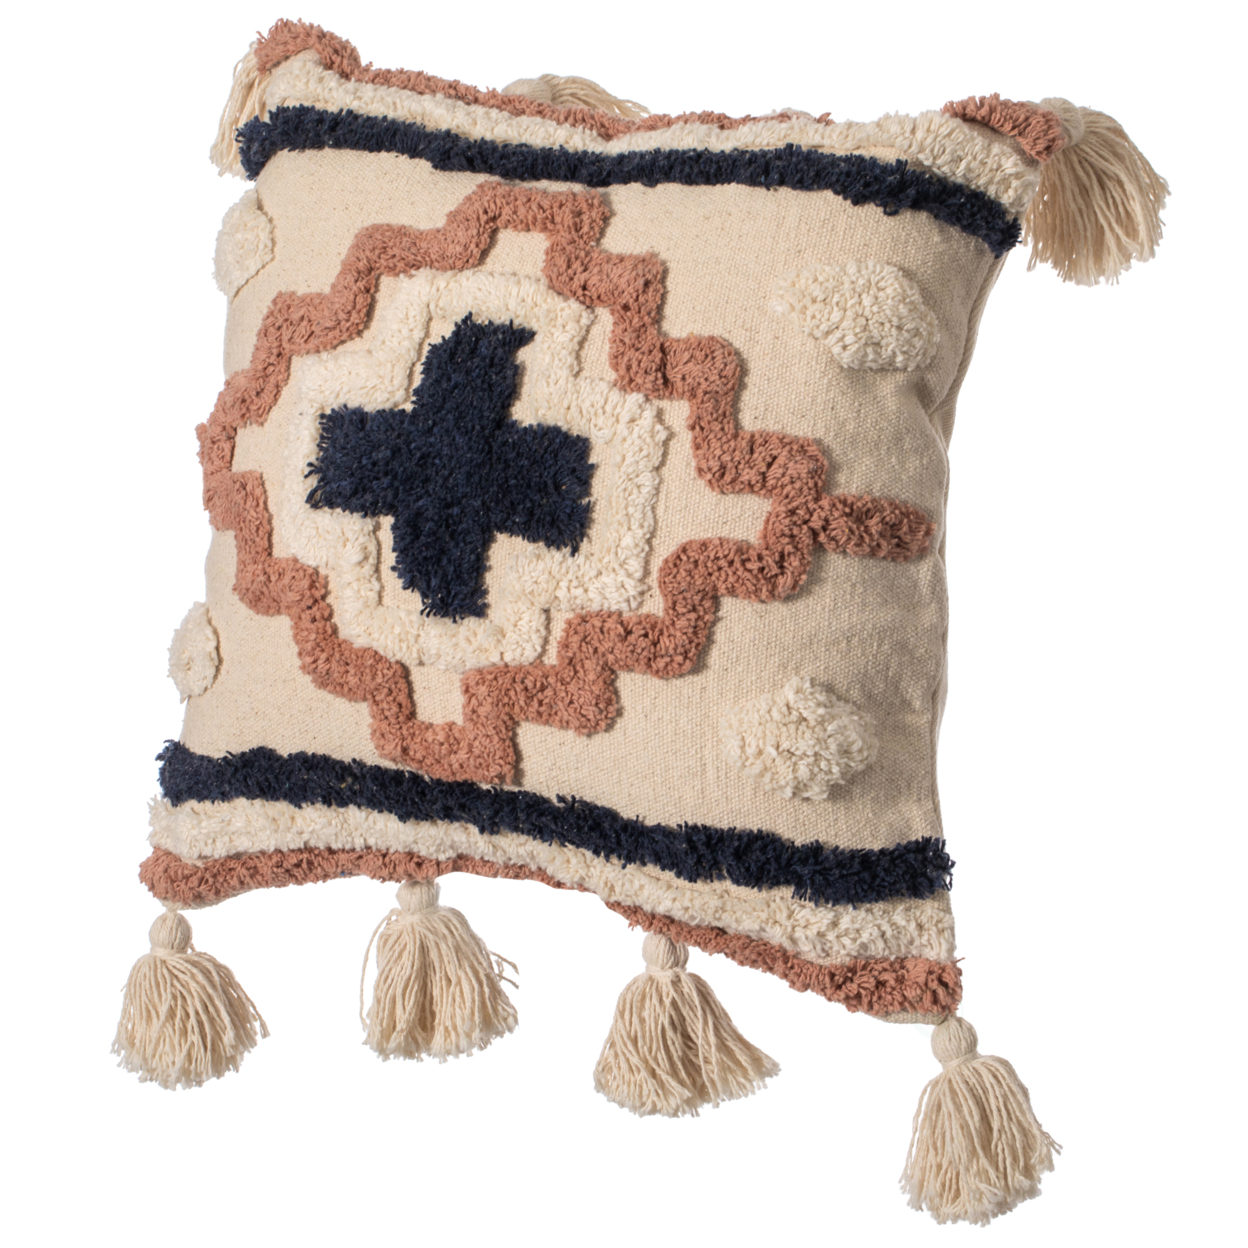 16 Handwoven Cotton Throw Pillow Cover With Tufted Designs And Side Tassels - Line